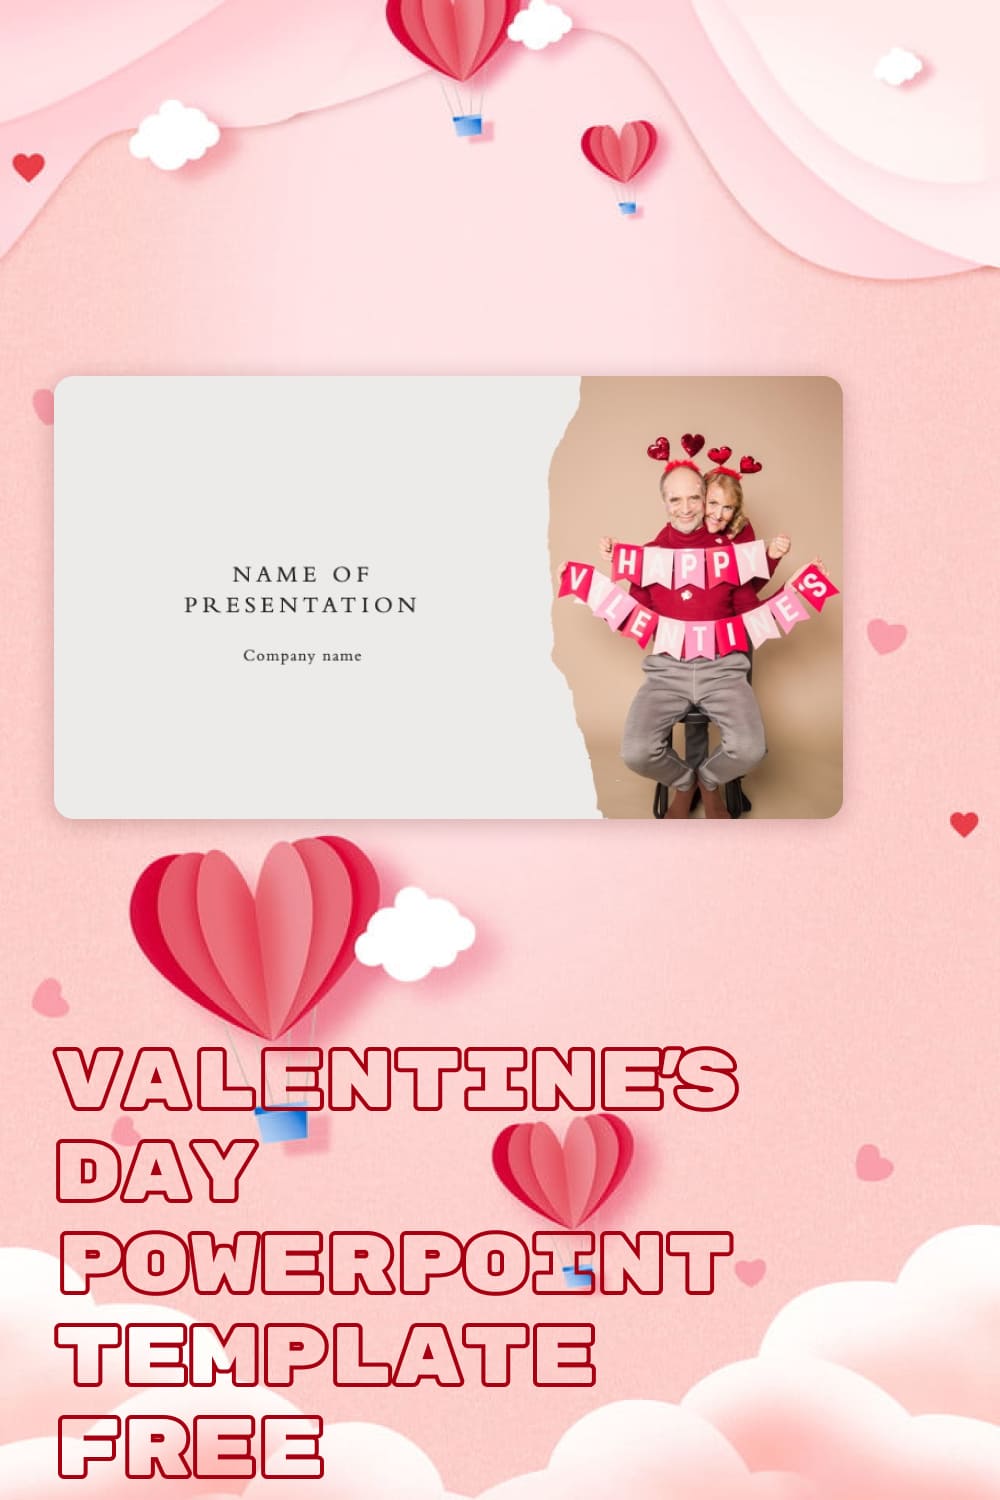 Pinterest Valentines Day Powerpoint Template Free.